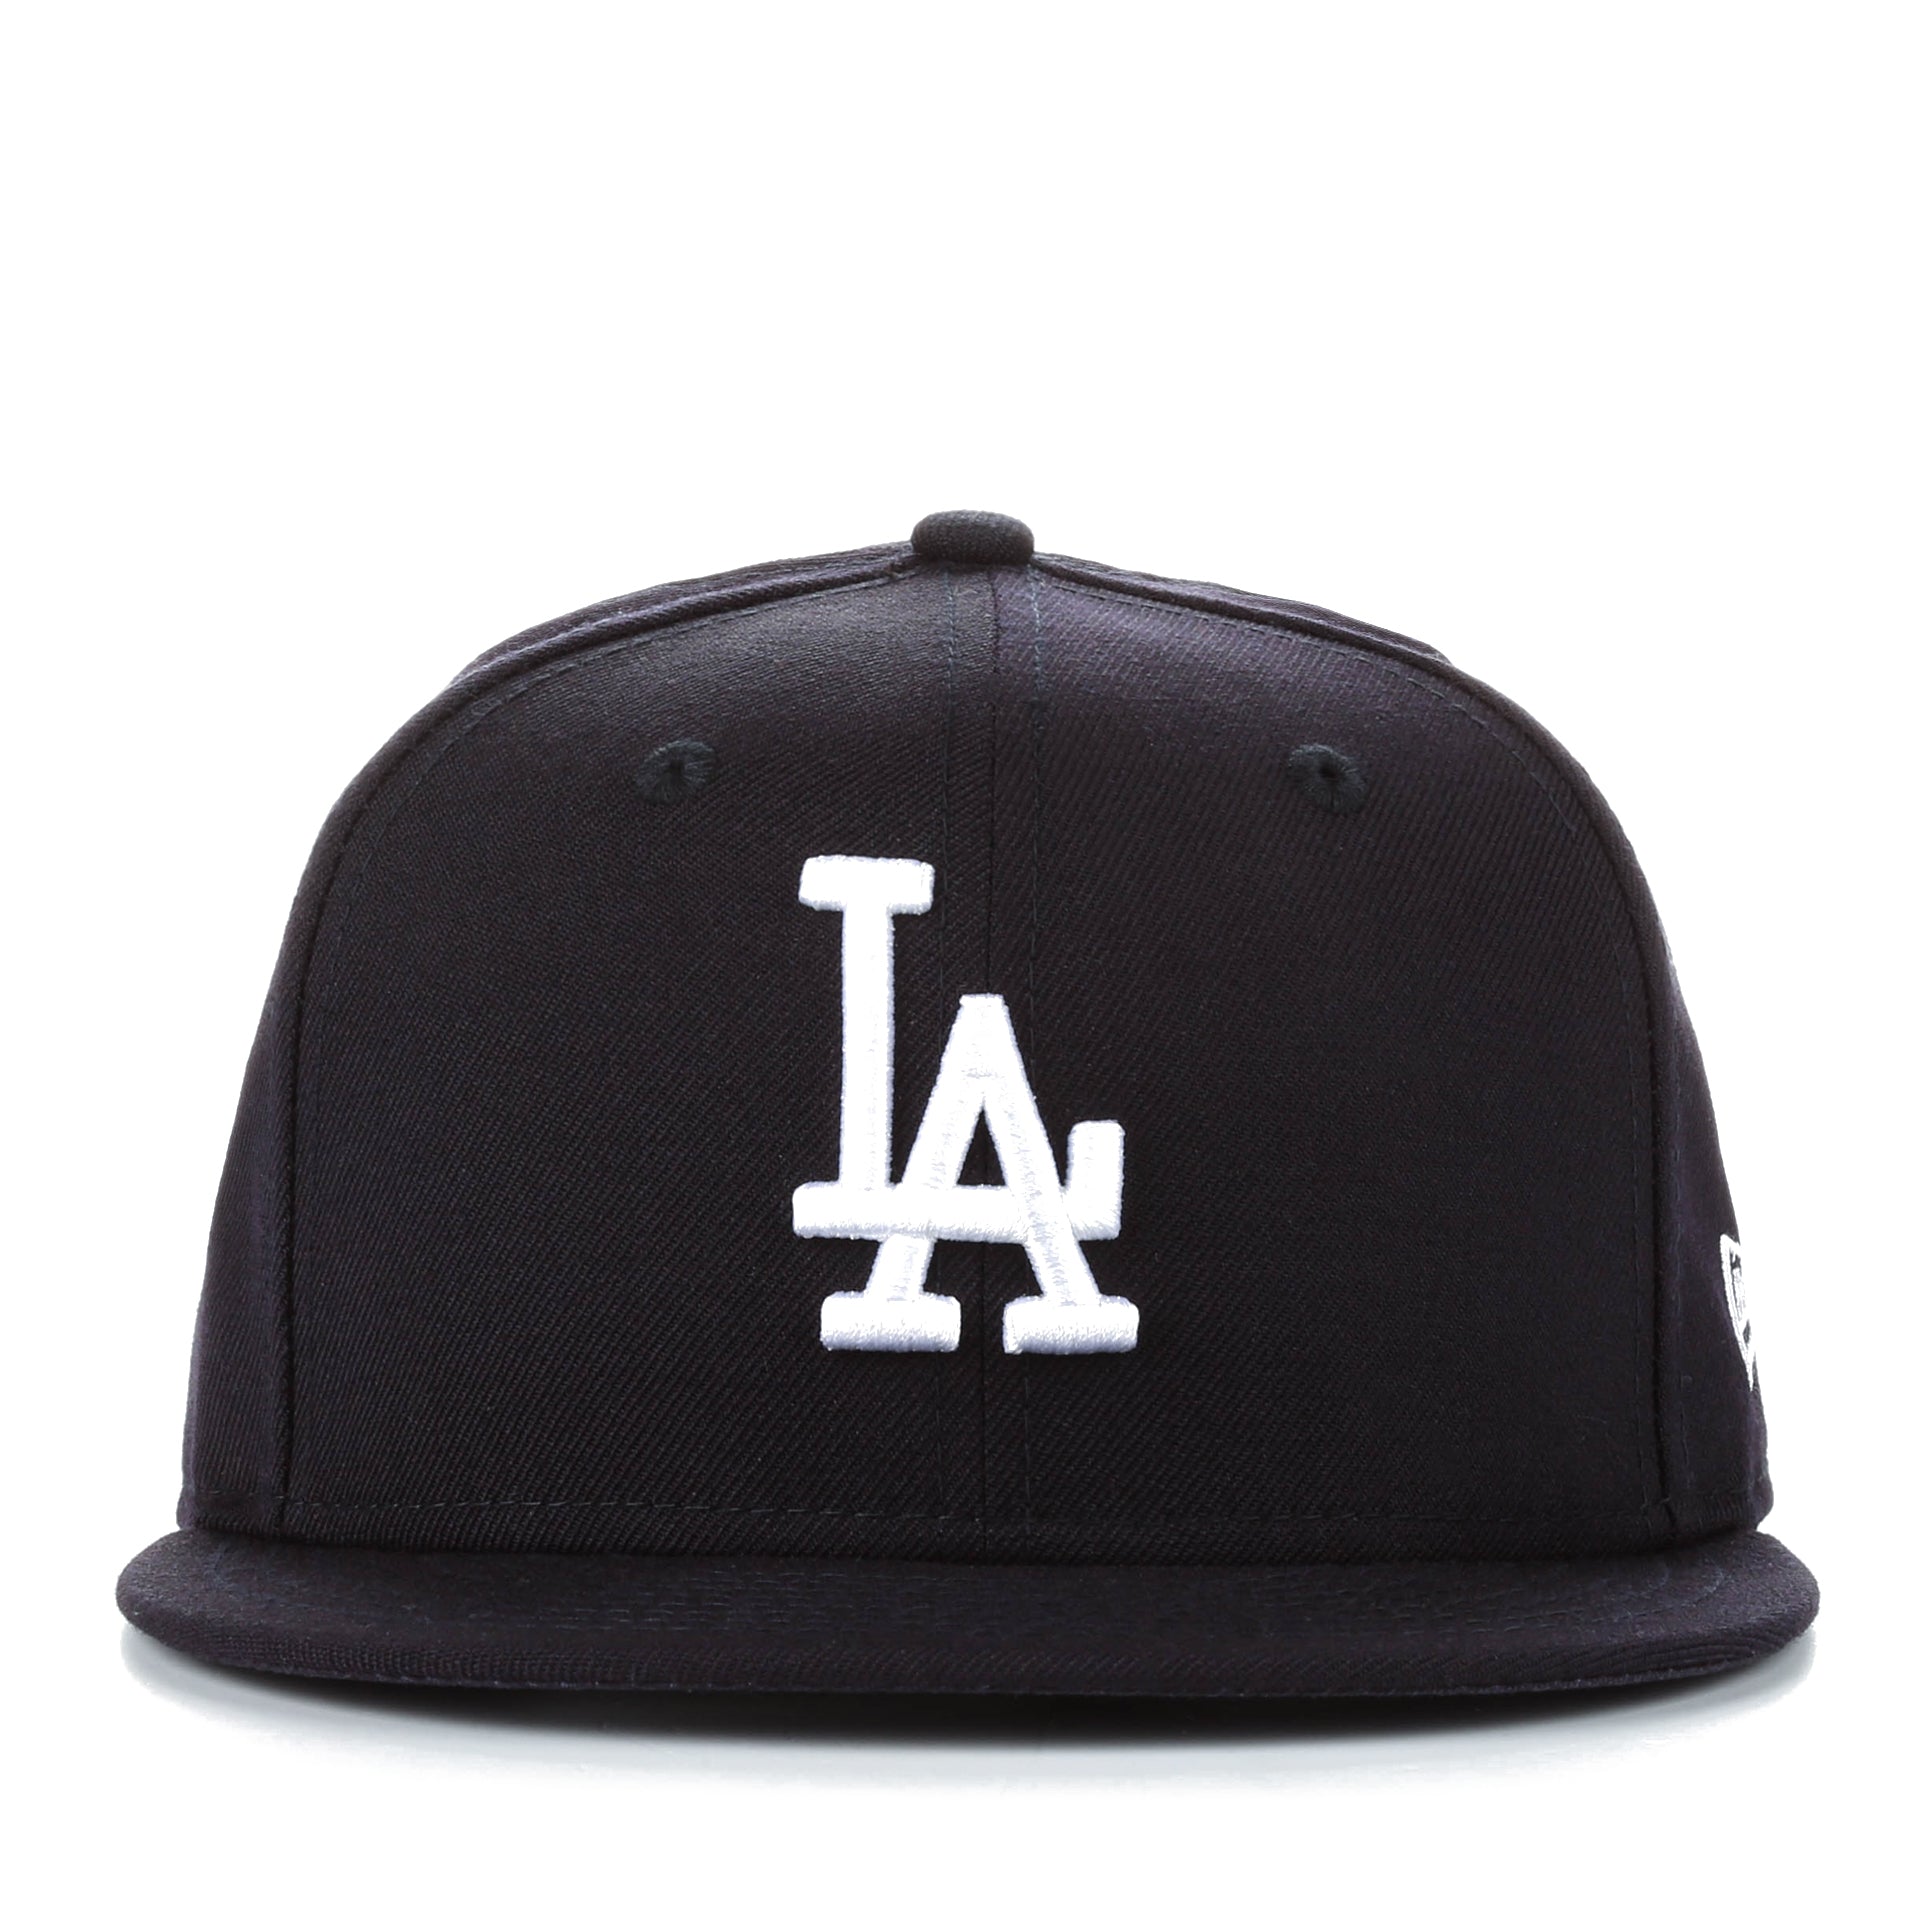 New Era 59Fifty MLB Basic Fitted Cap - Los Angeles Dodgers/Grey